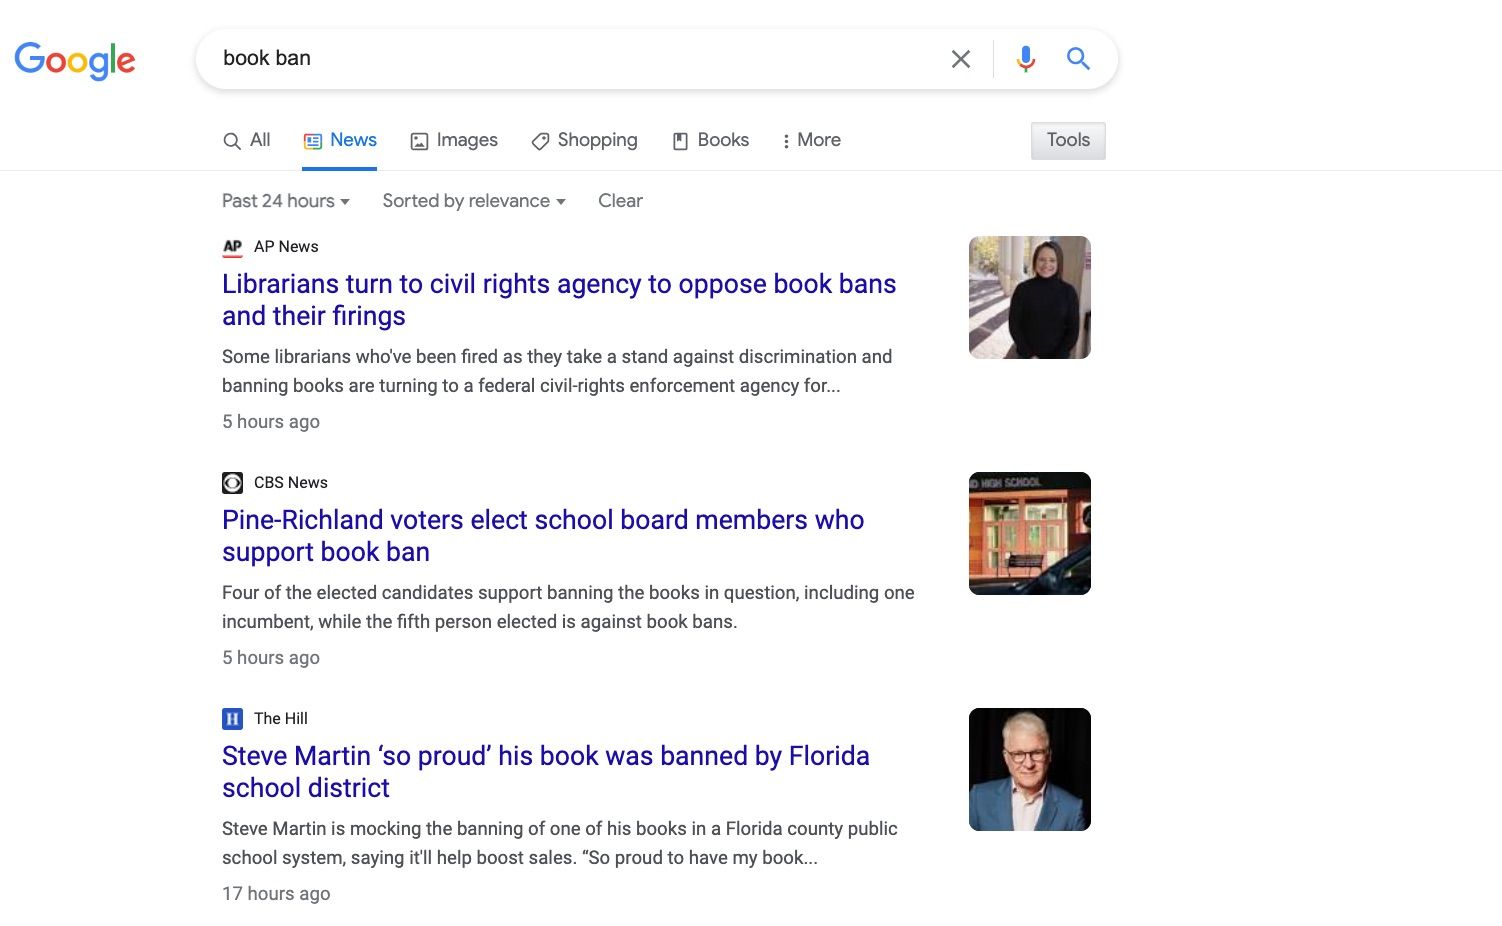 Google search for "book ban" with several stories about Steve Martin.